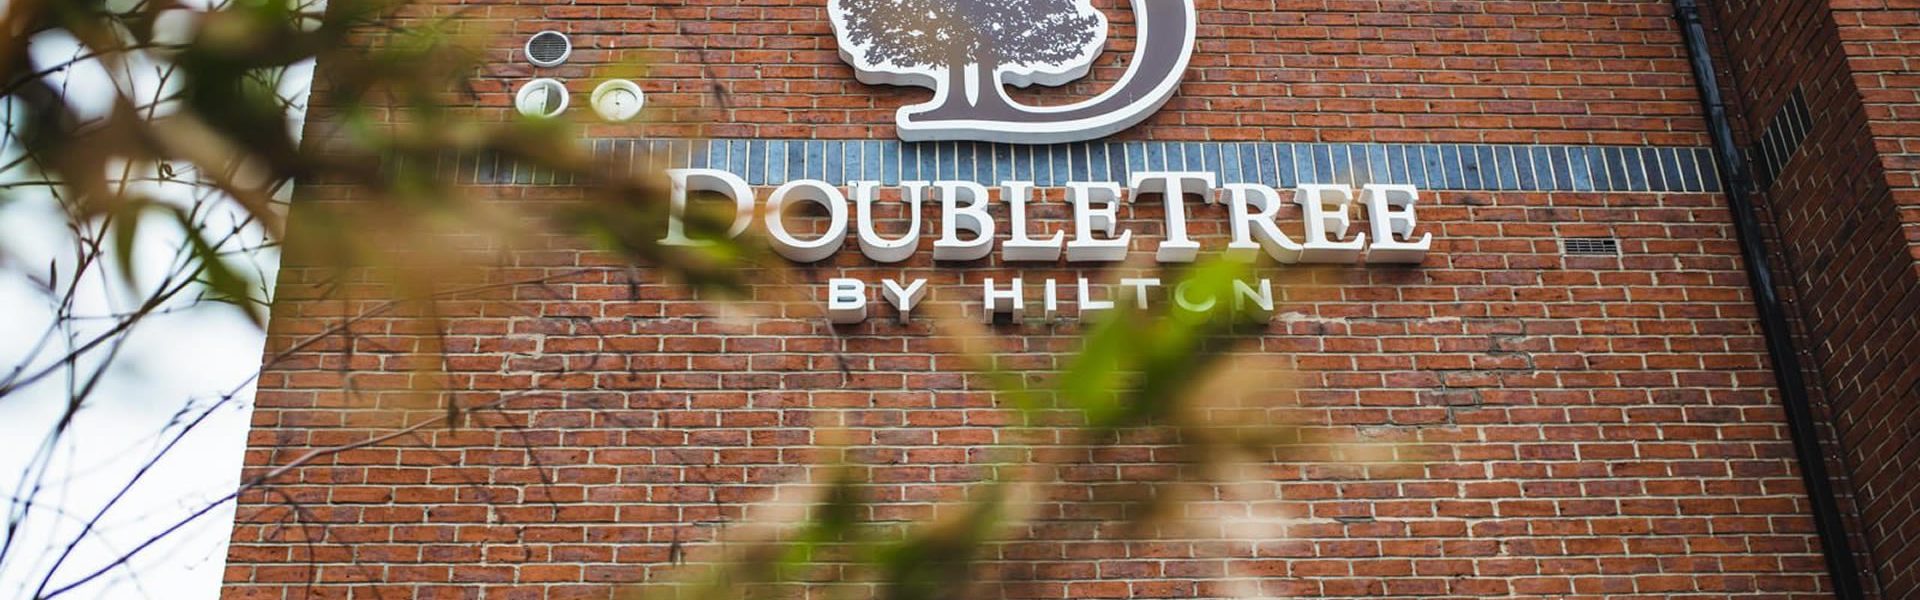 DoubleTree by Hilton York, North Yorkshire